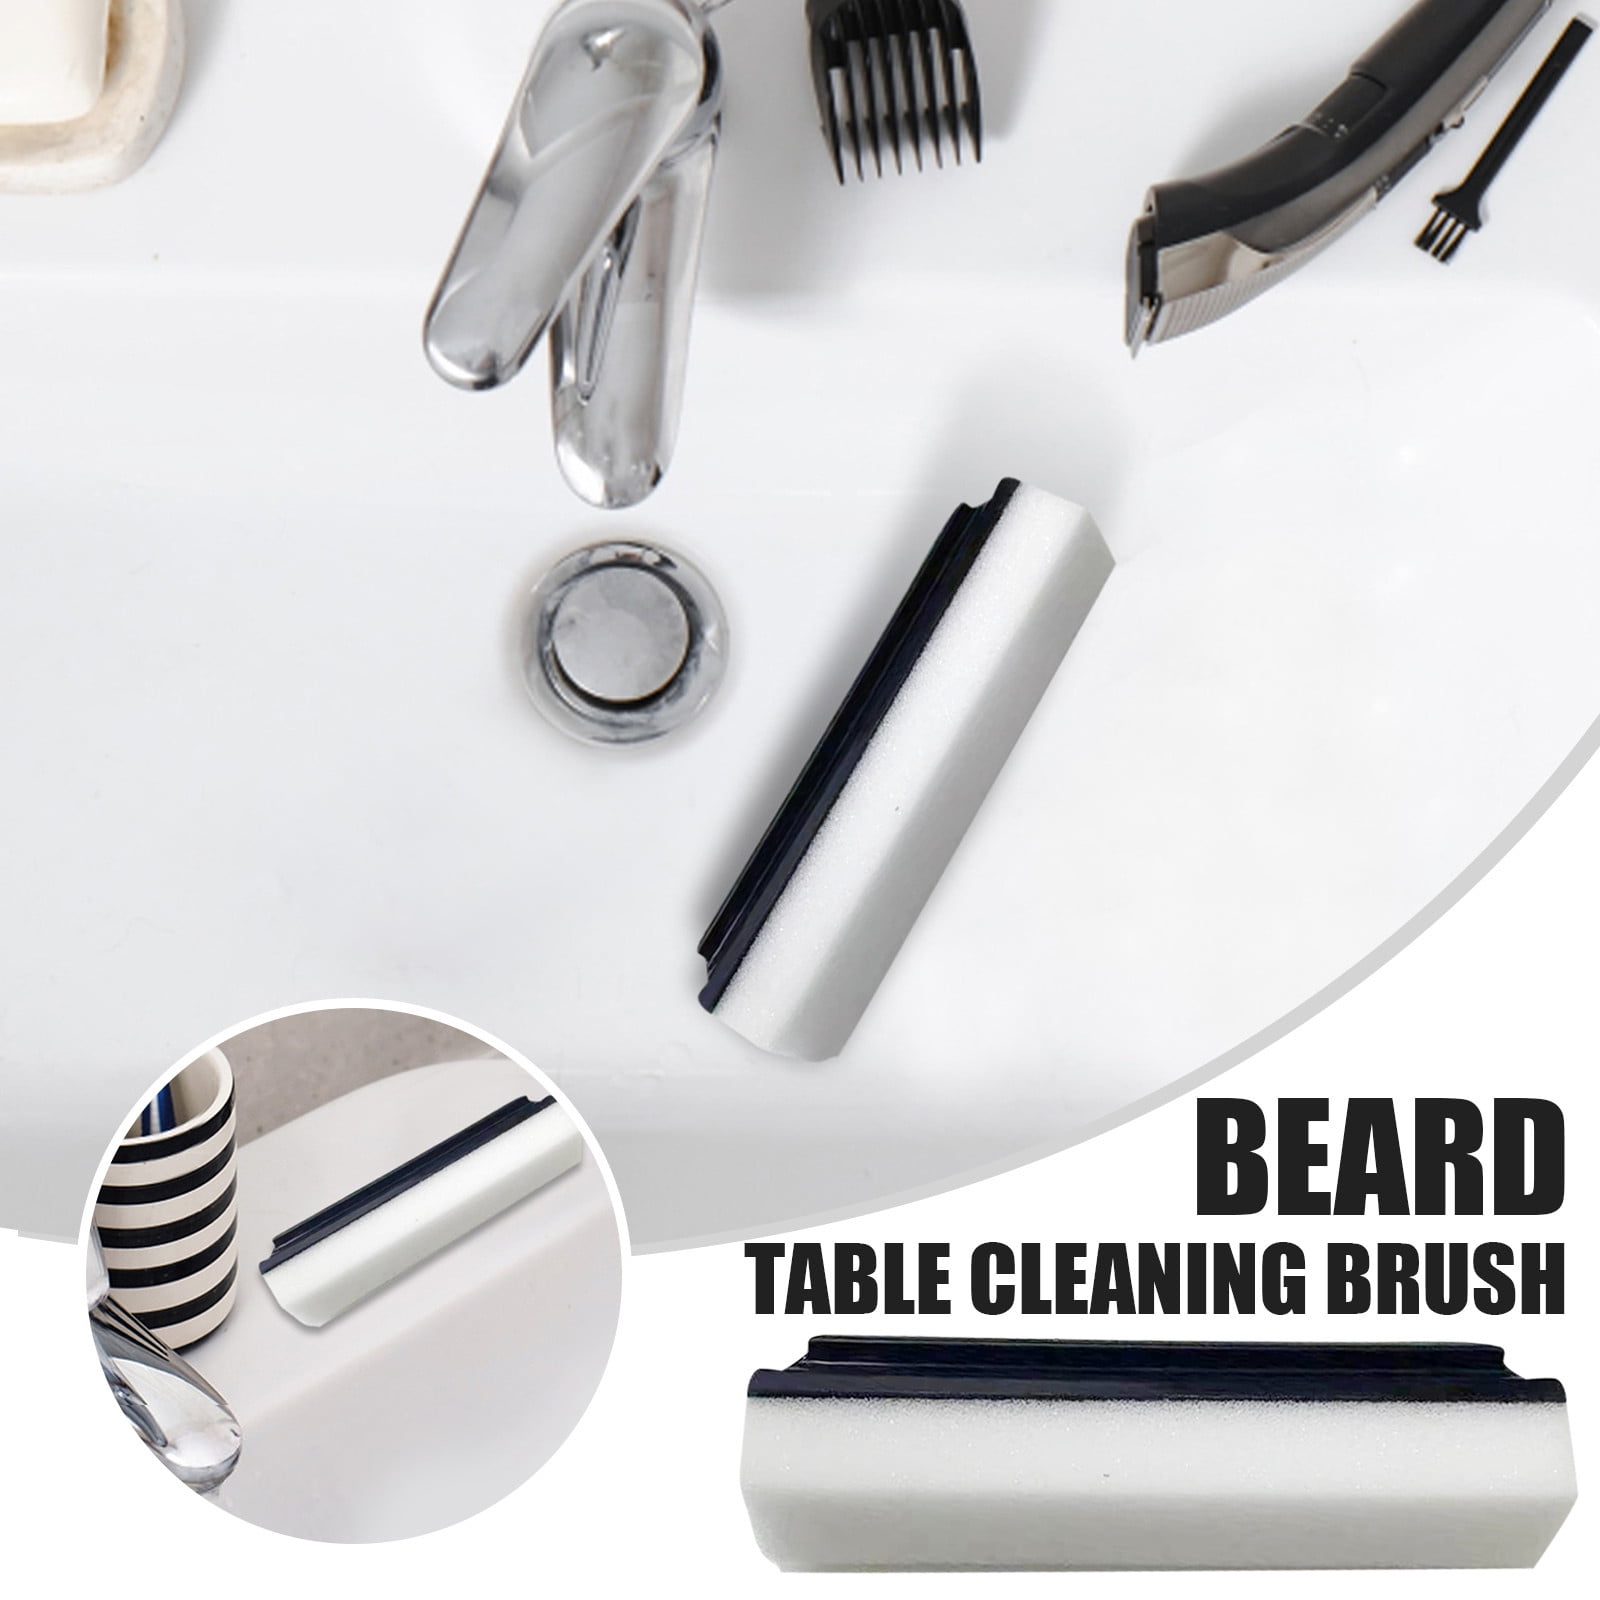 Beard Hair Cleaner for Sink - An Essential for Your Beard Grooming Kit -  Beard Trimming Catcher Hair Sponge for Quick Clean Up - Beard Hair Catcher